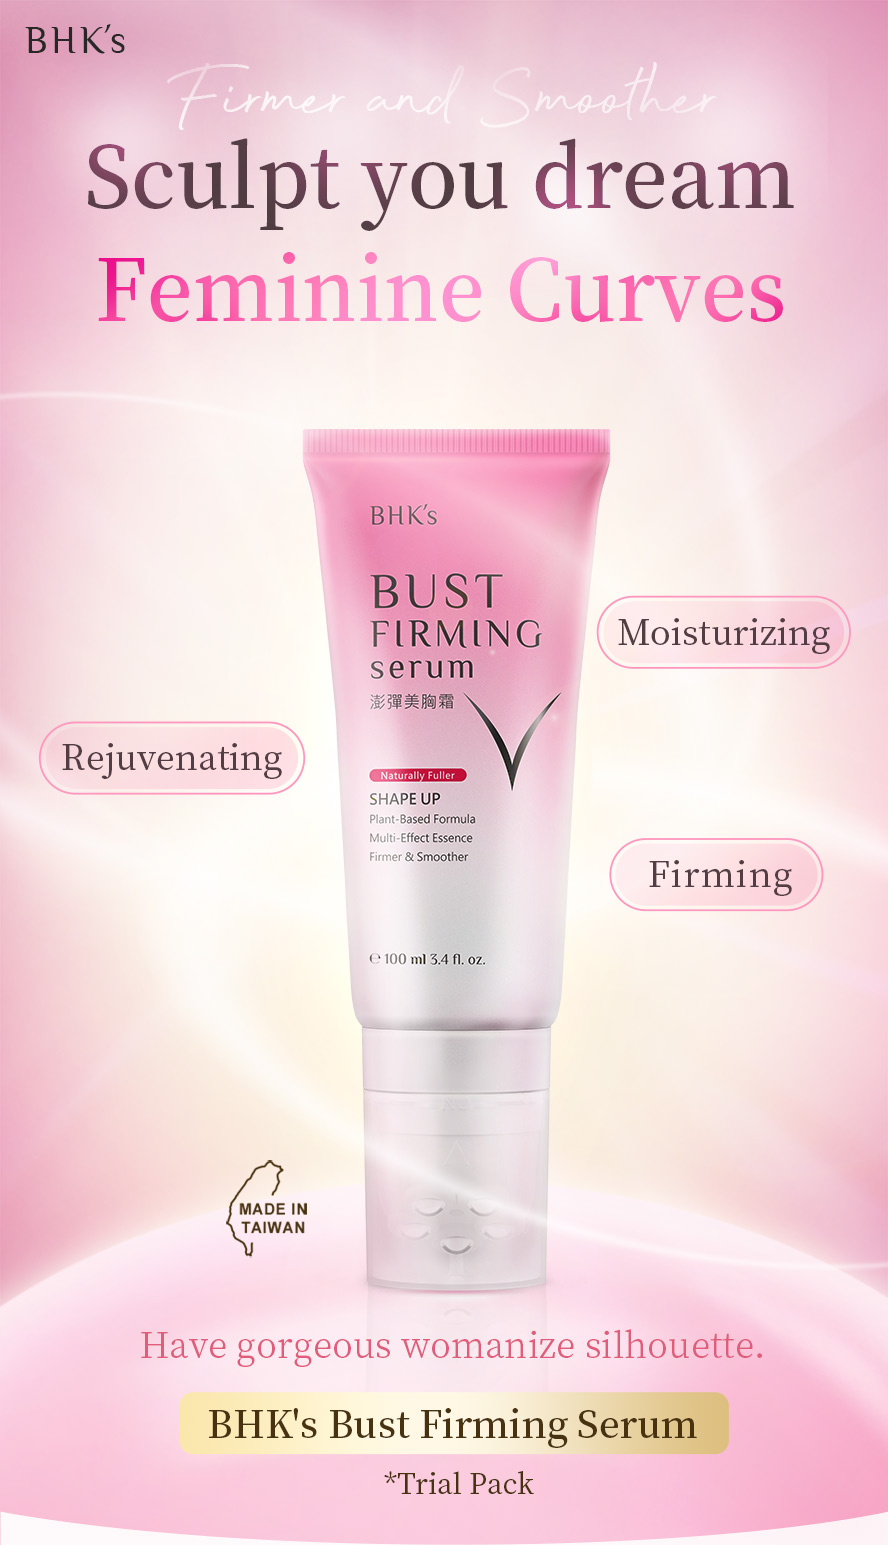 Help in breast firming, breast sagging prevention & promote bigger breast. Recommend to use as massage cream for better breast shape.